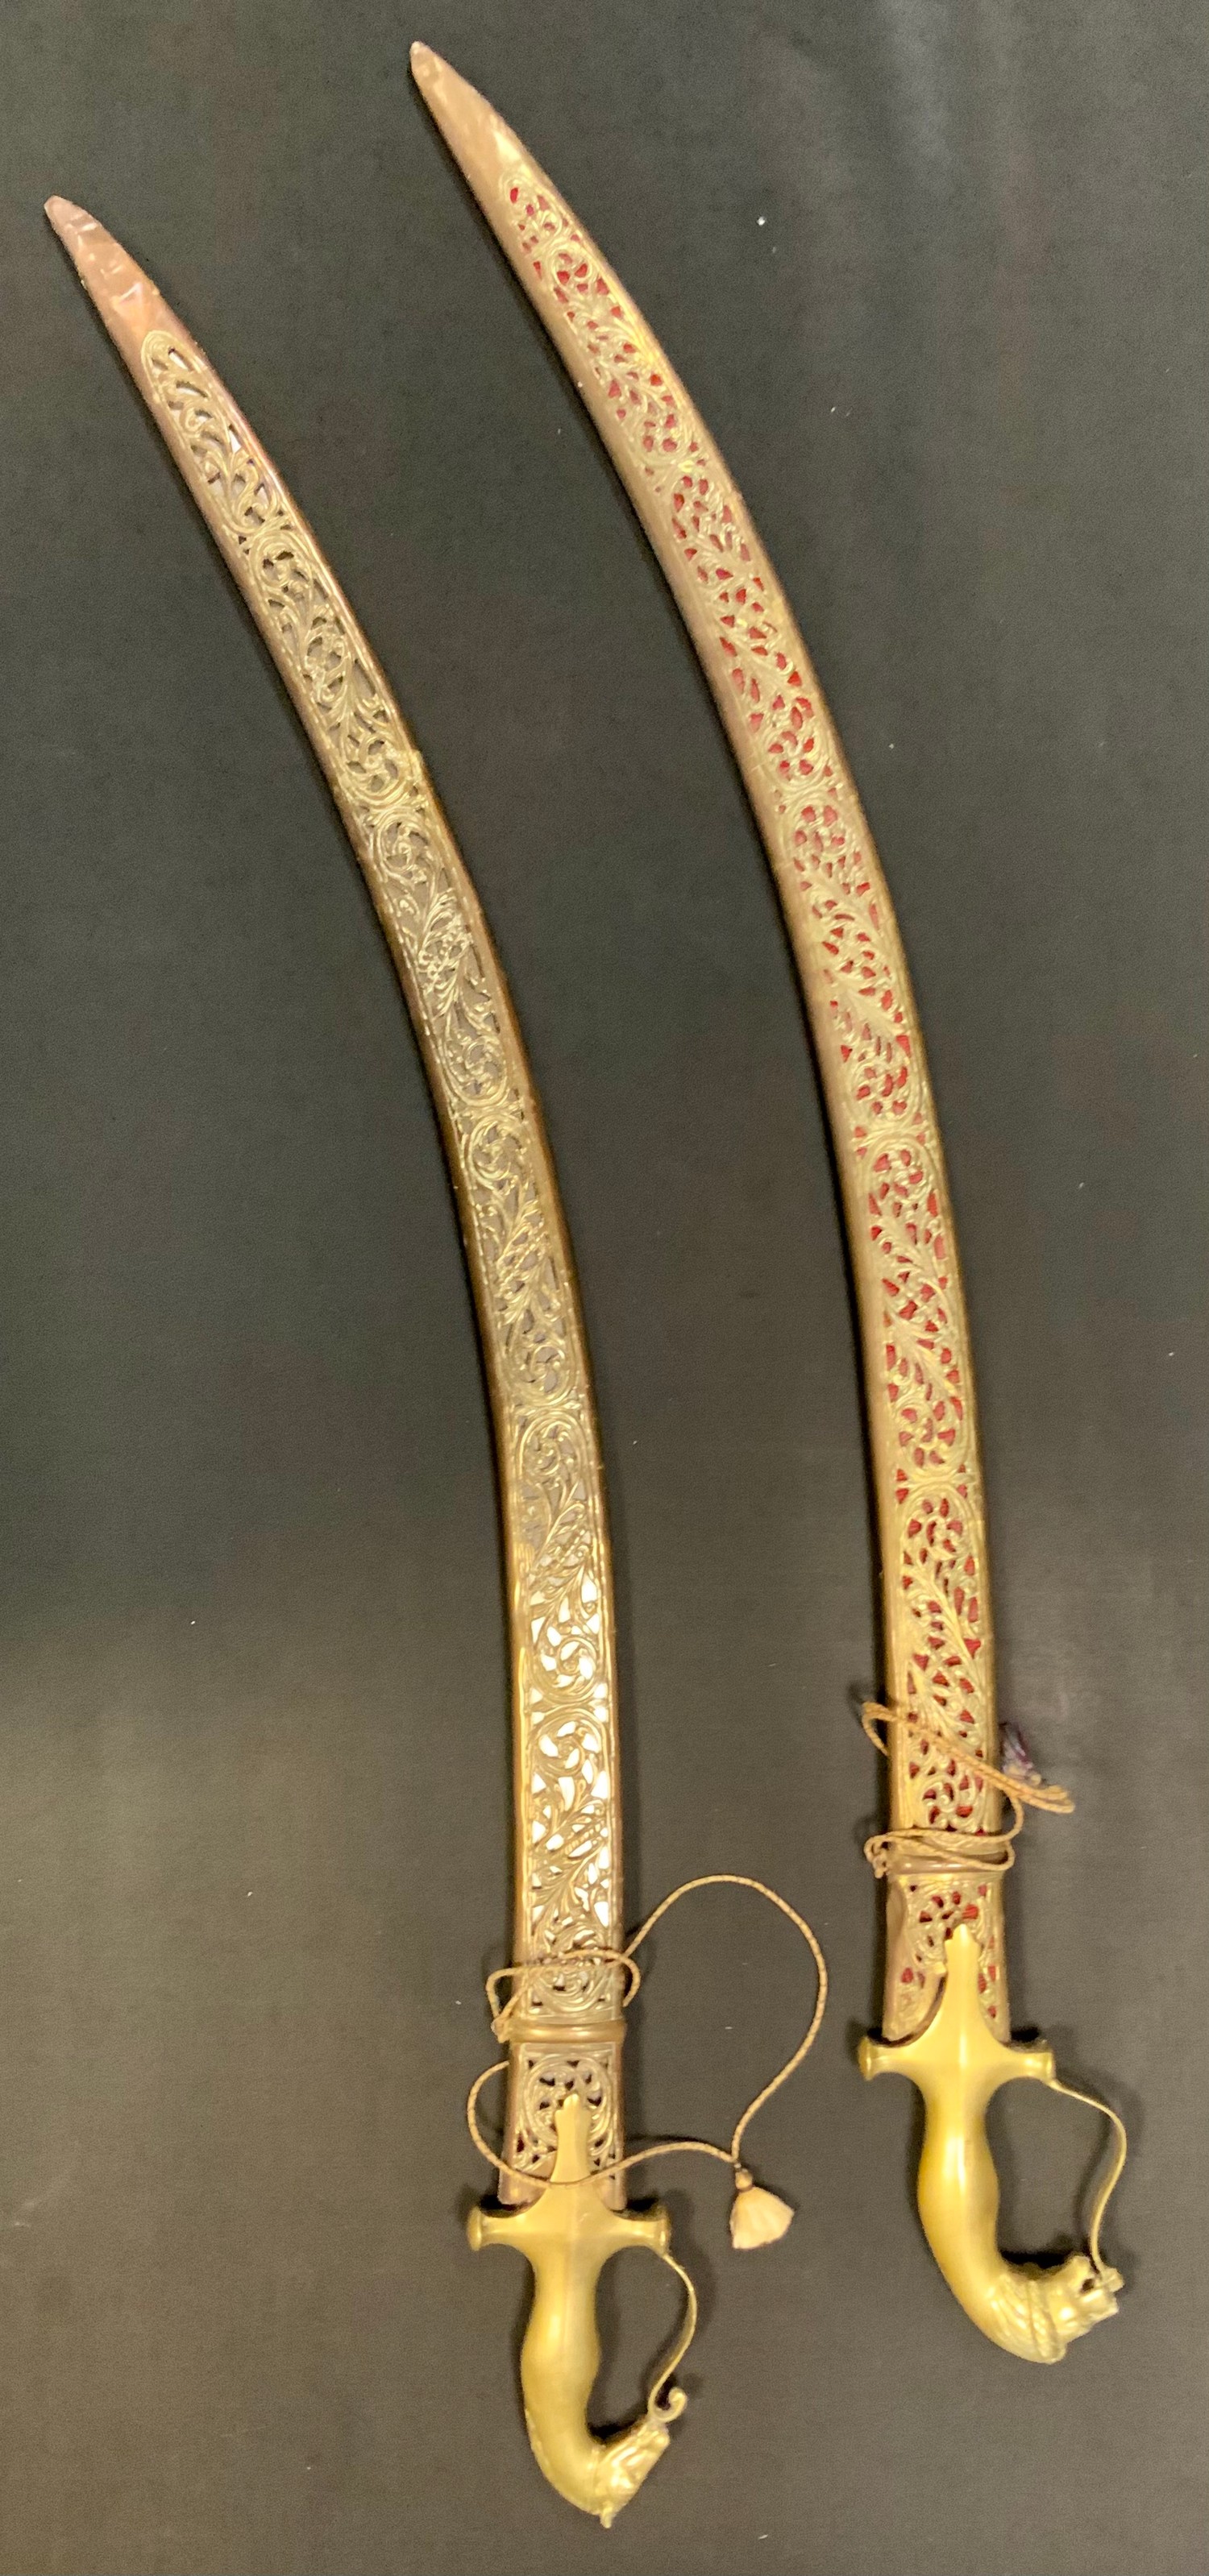 Two early 20th century Indian side arms, with horsehead hilts, pierced scabbards